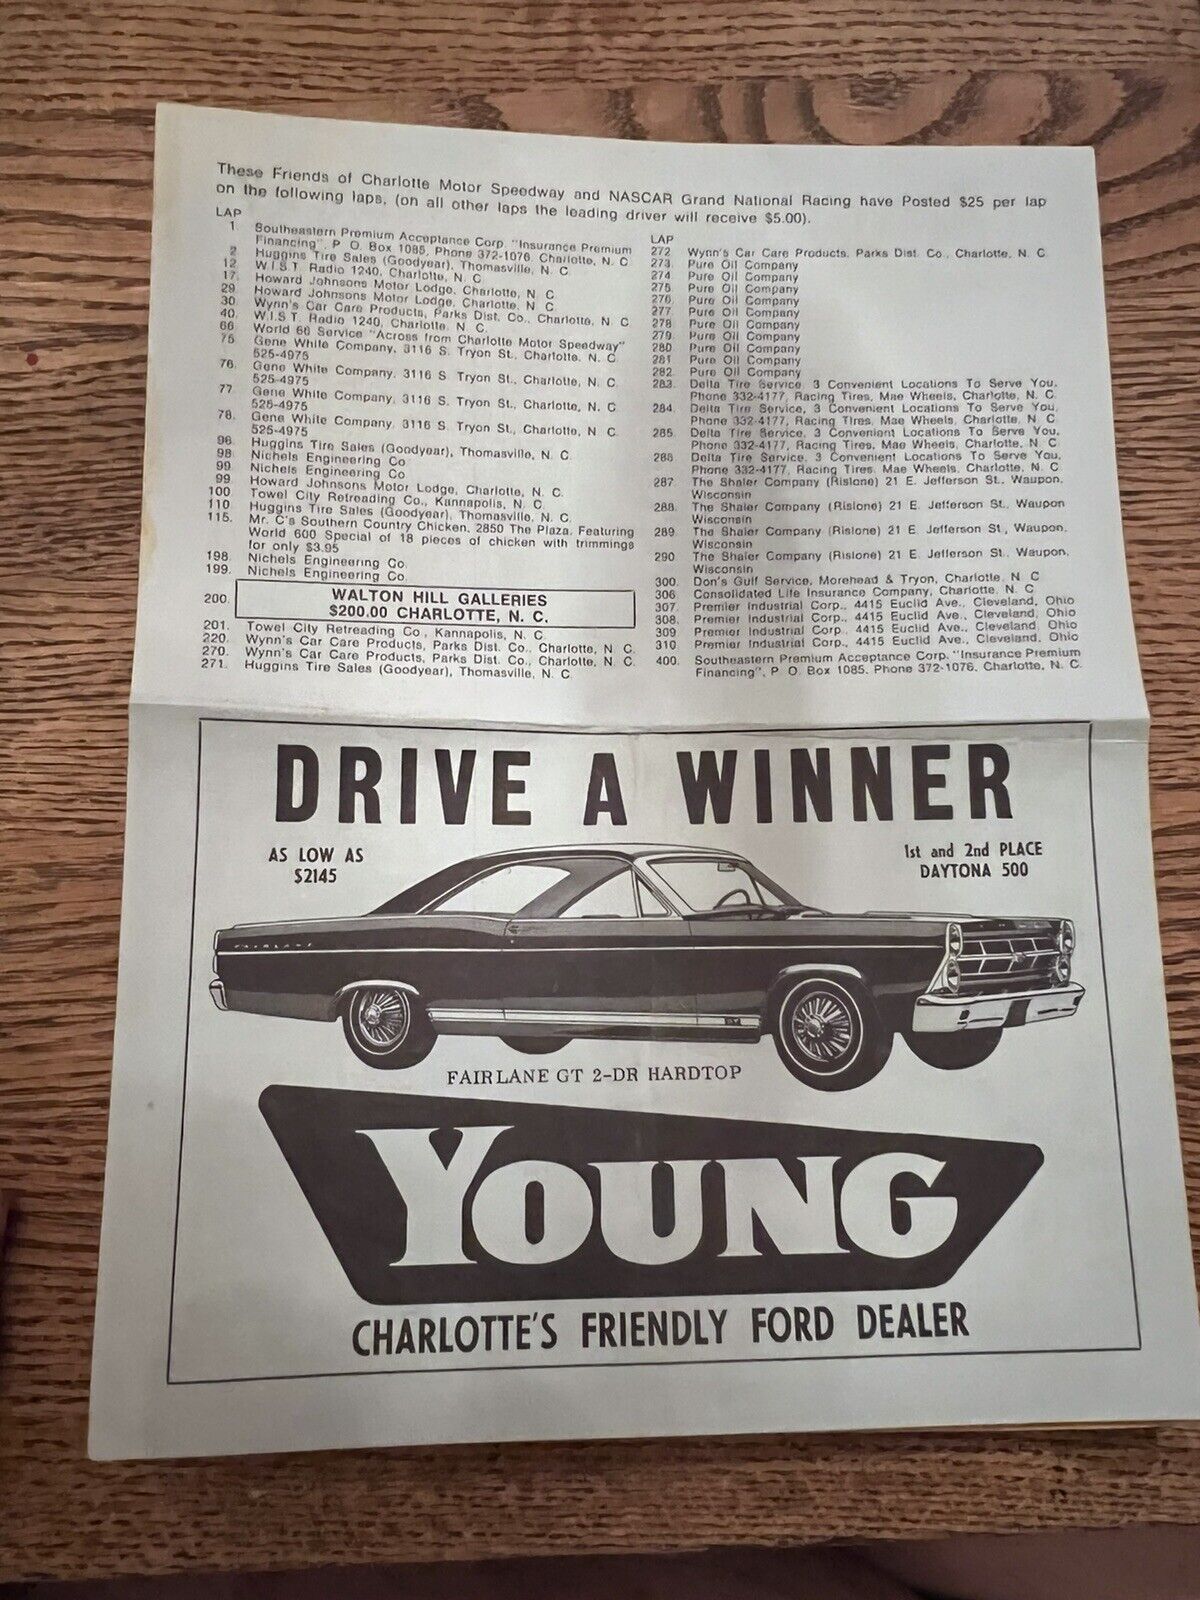 1967 Charlotte raceway nascar line up flyer with young Ford fairlane ad